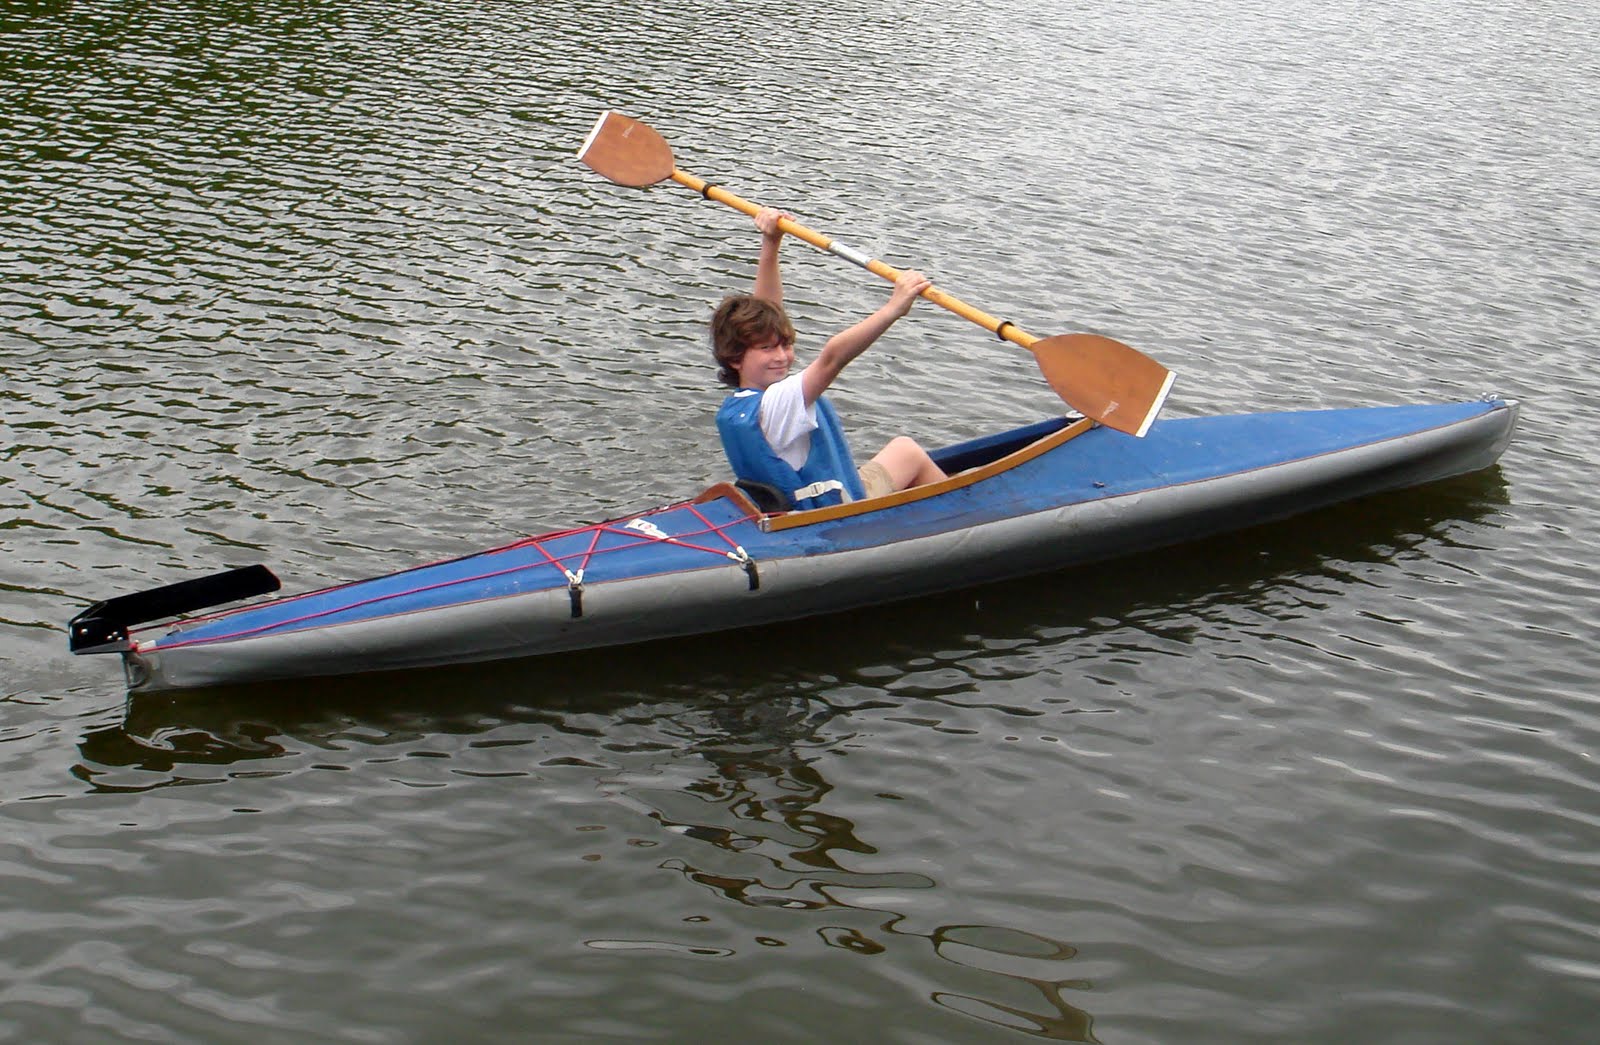 go canoeing images - frompo